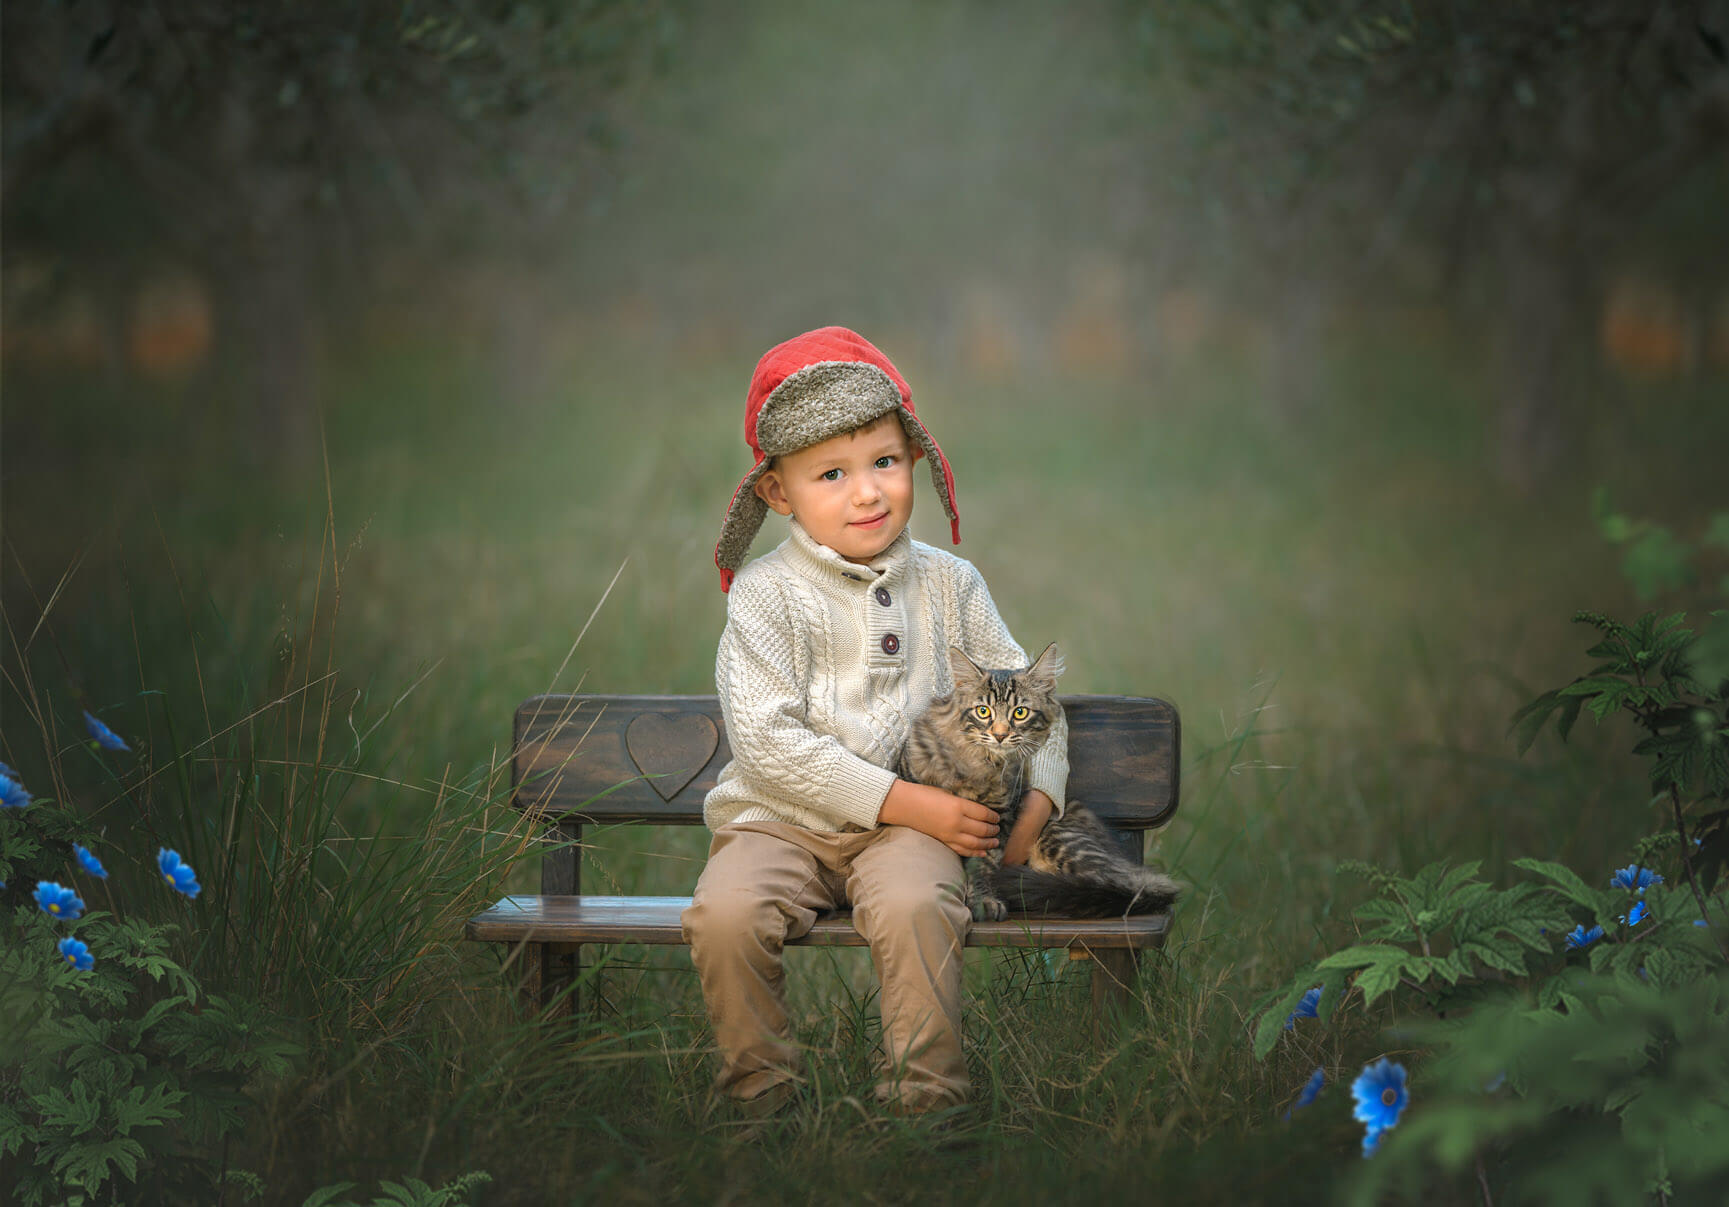 Perth child with hid cat during photo session